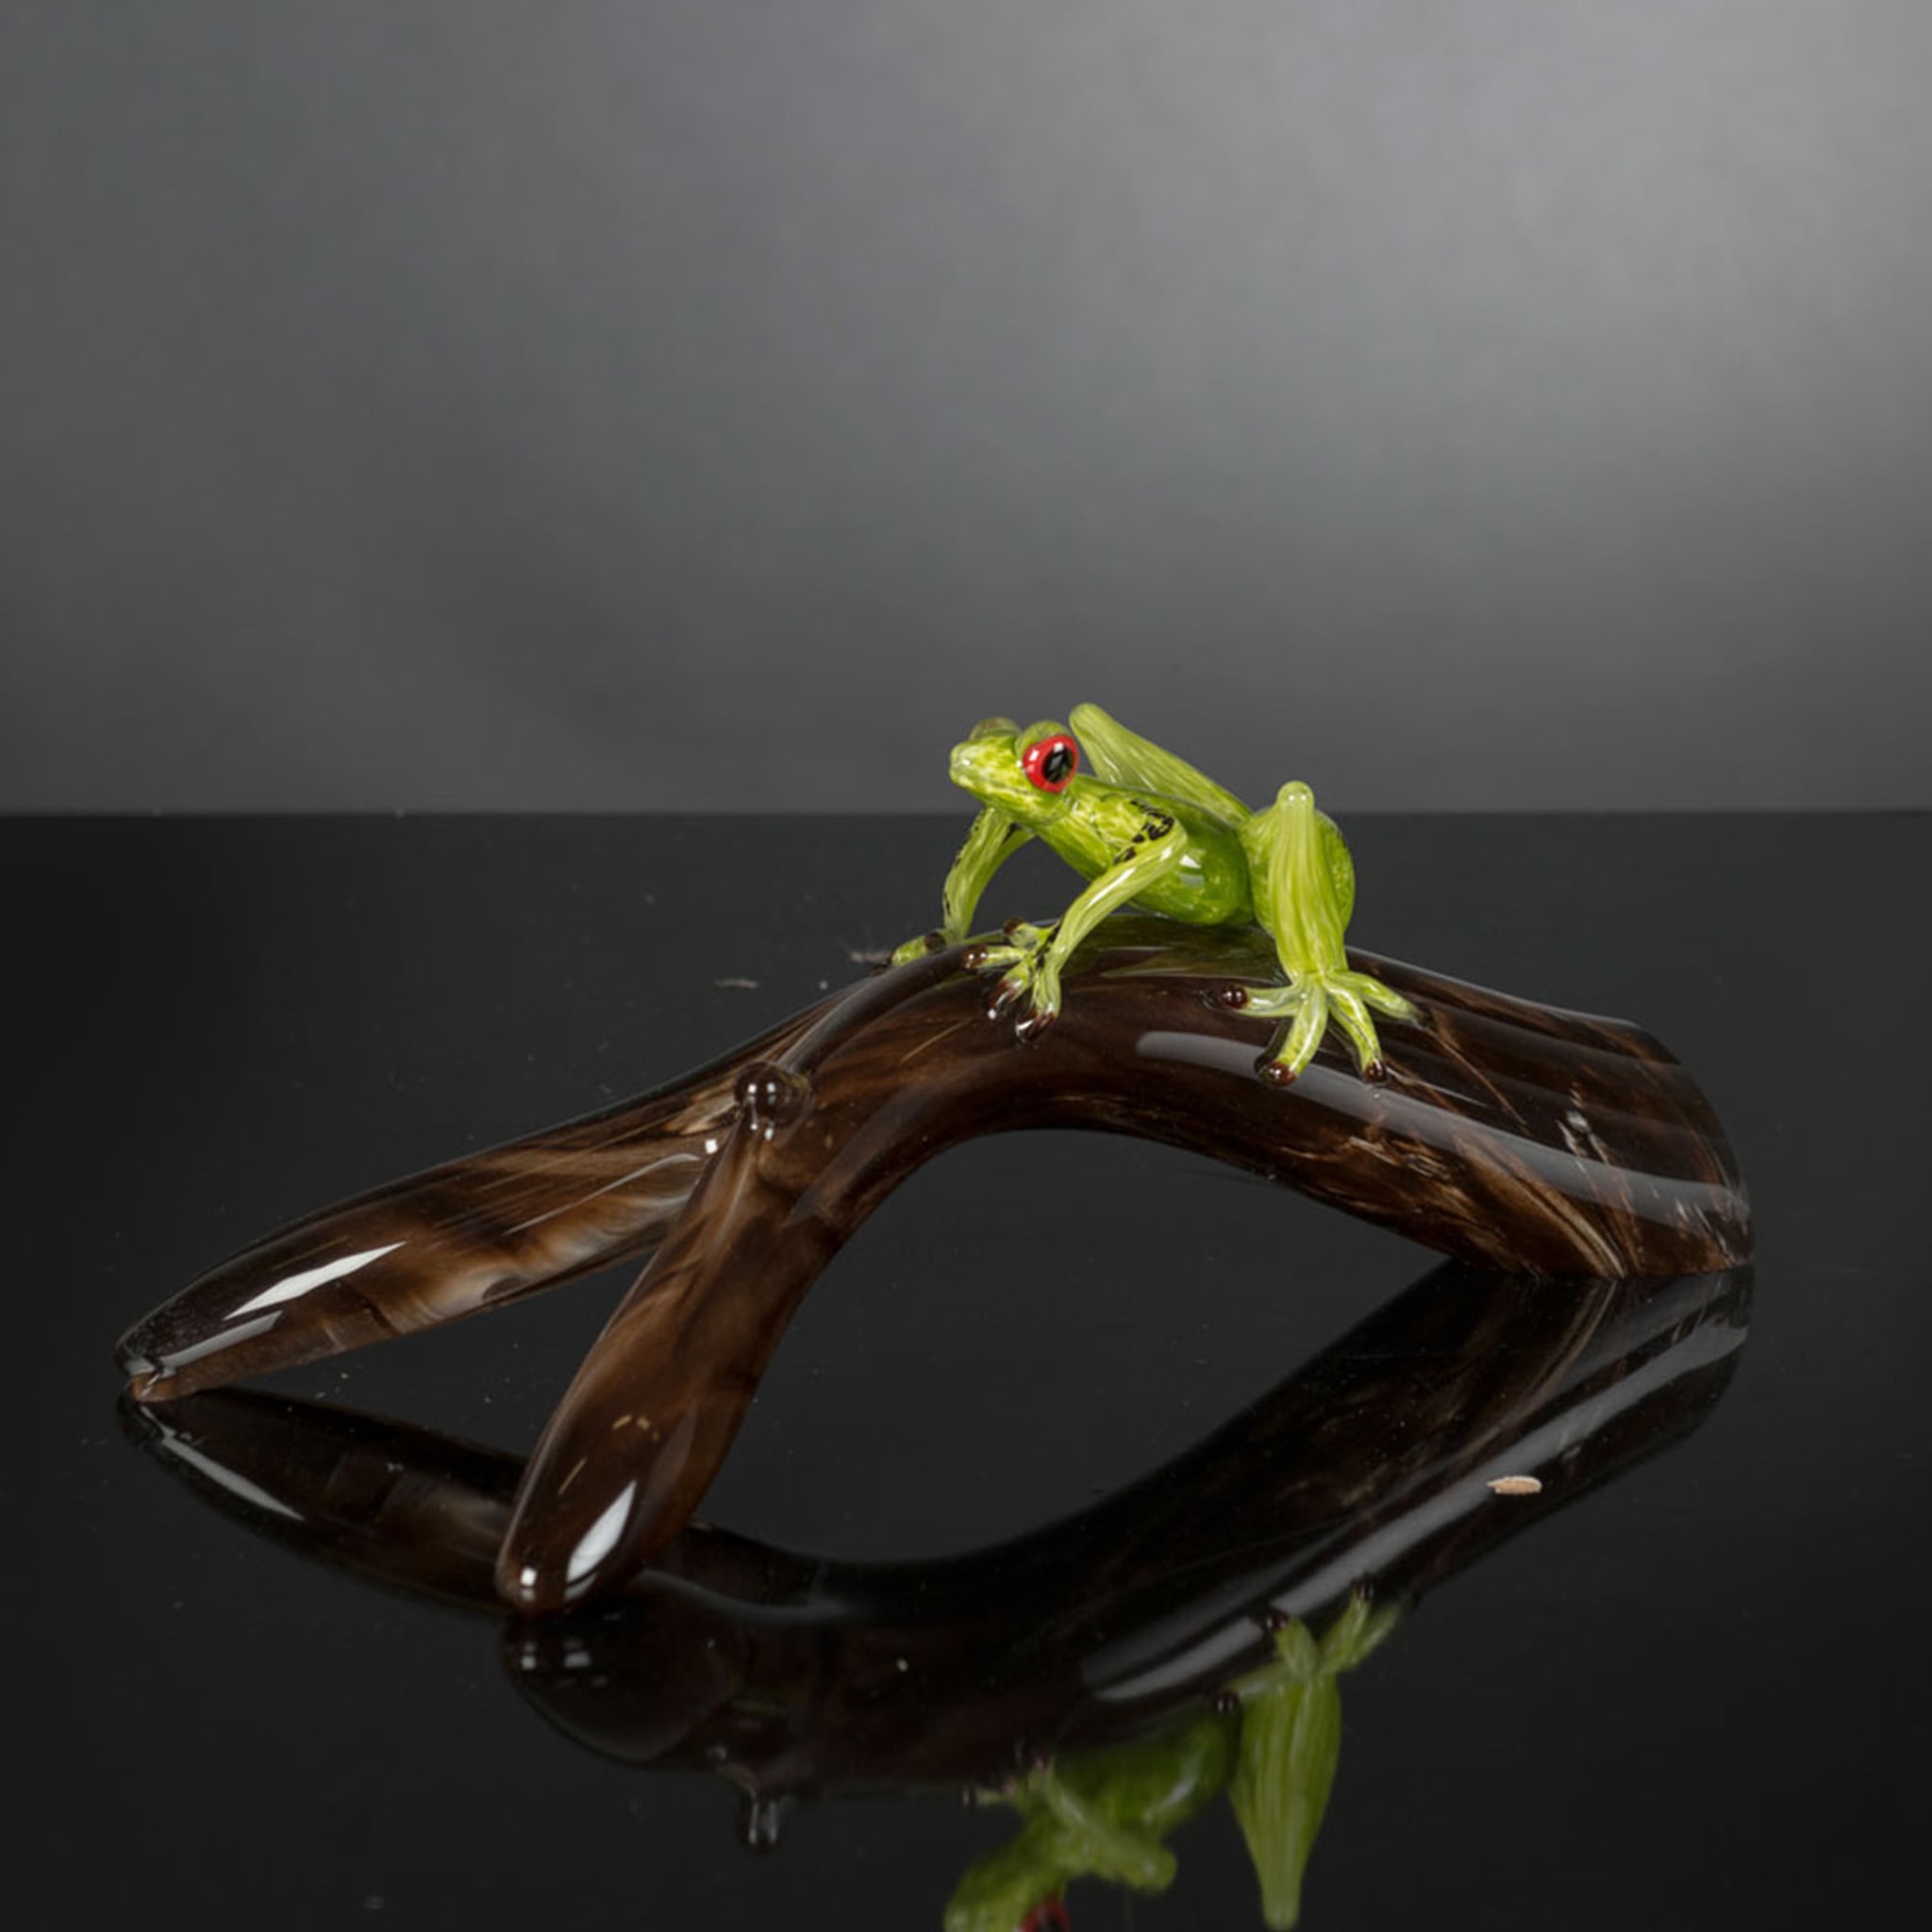 Glass Frog On A Branch  - Alternative view 1